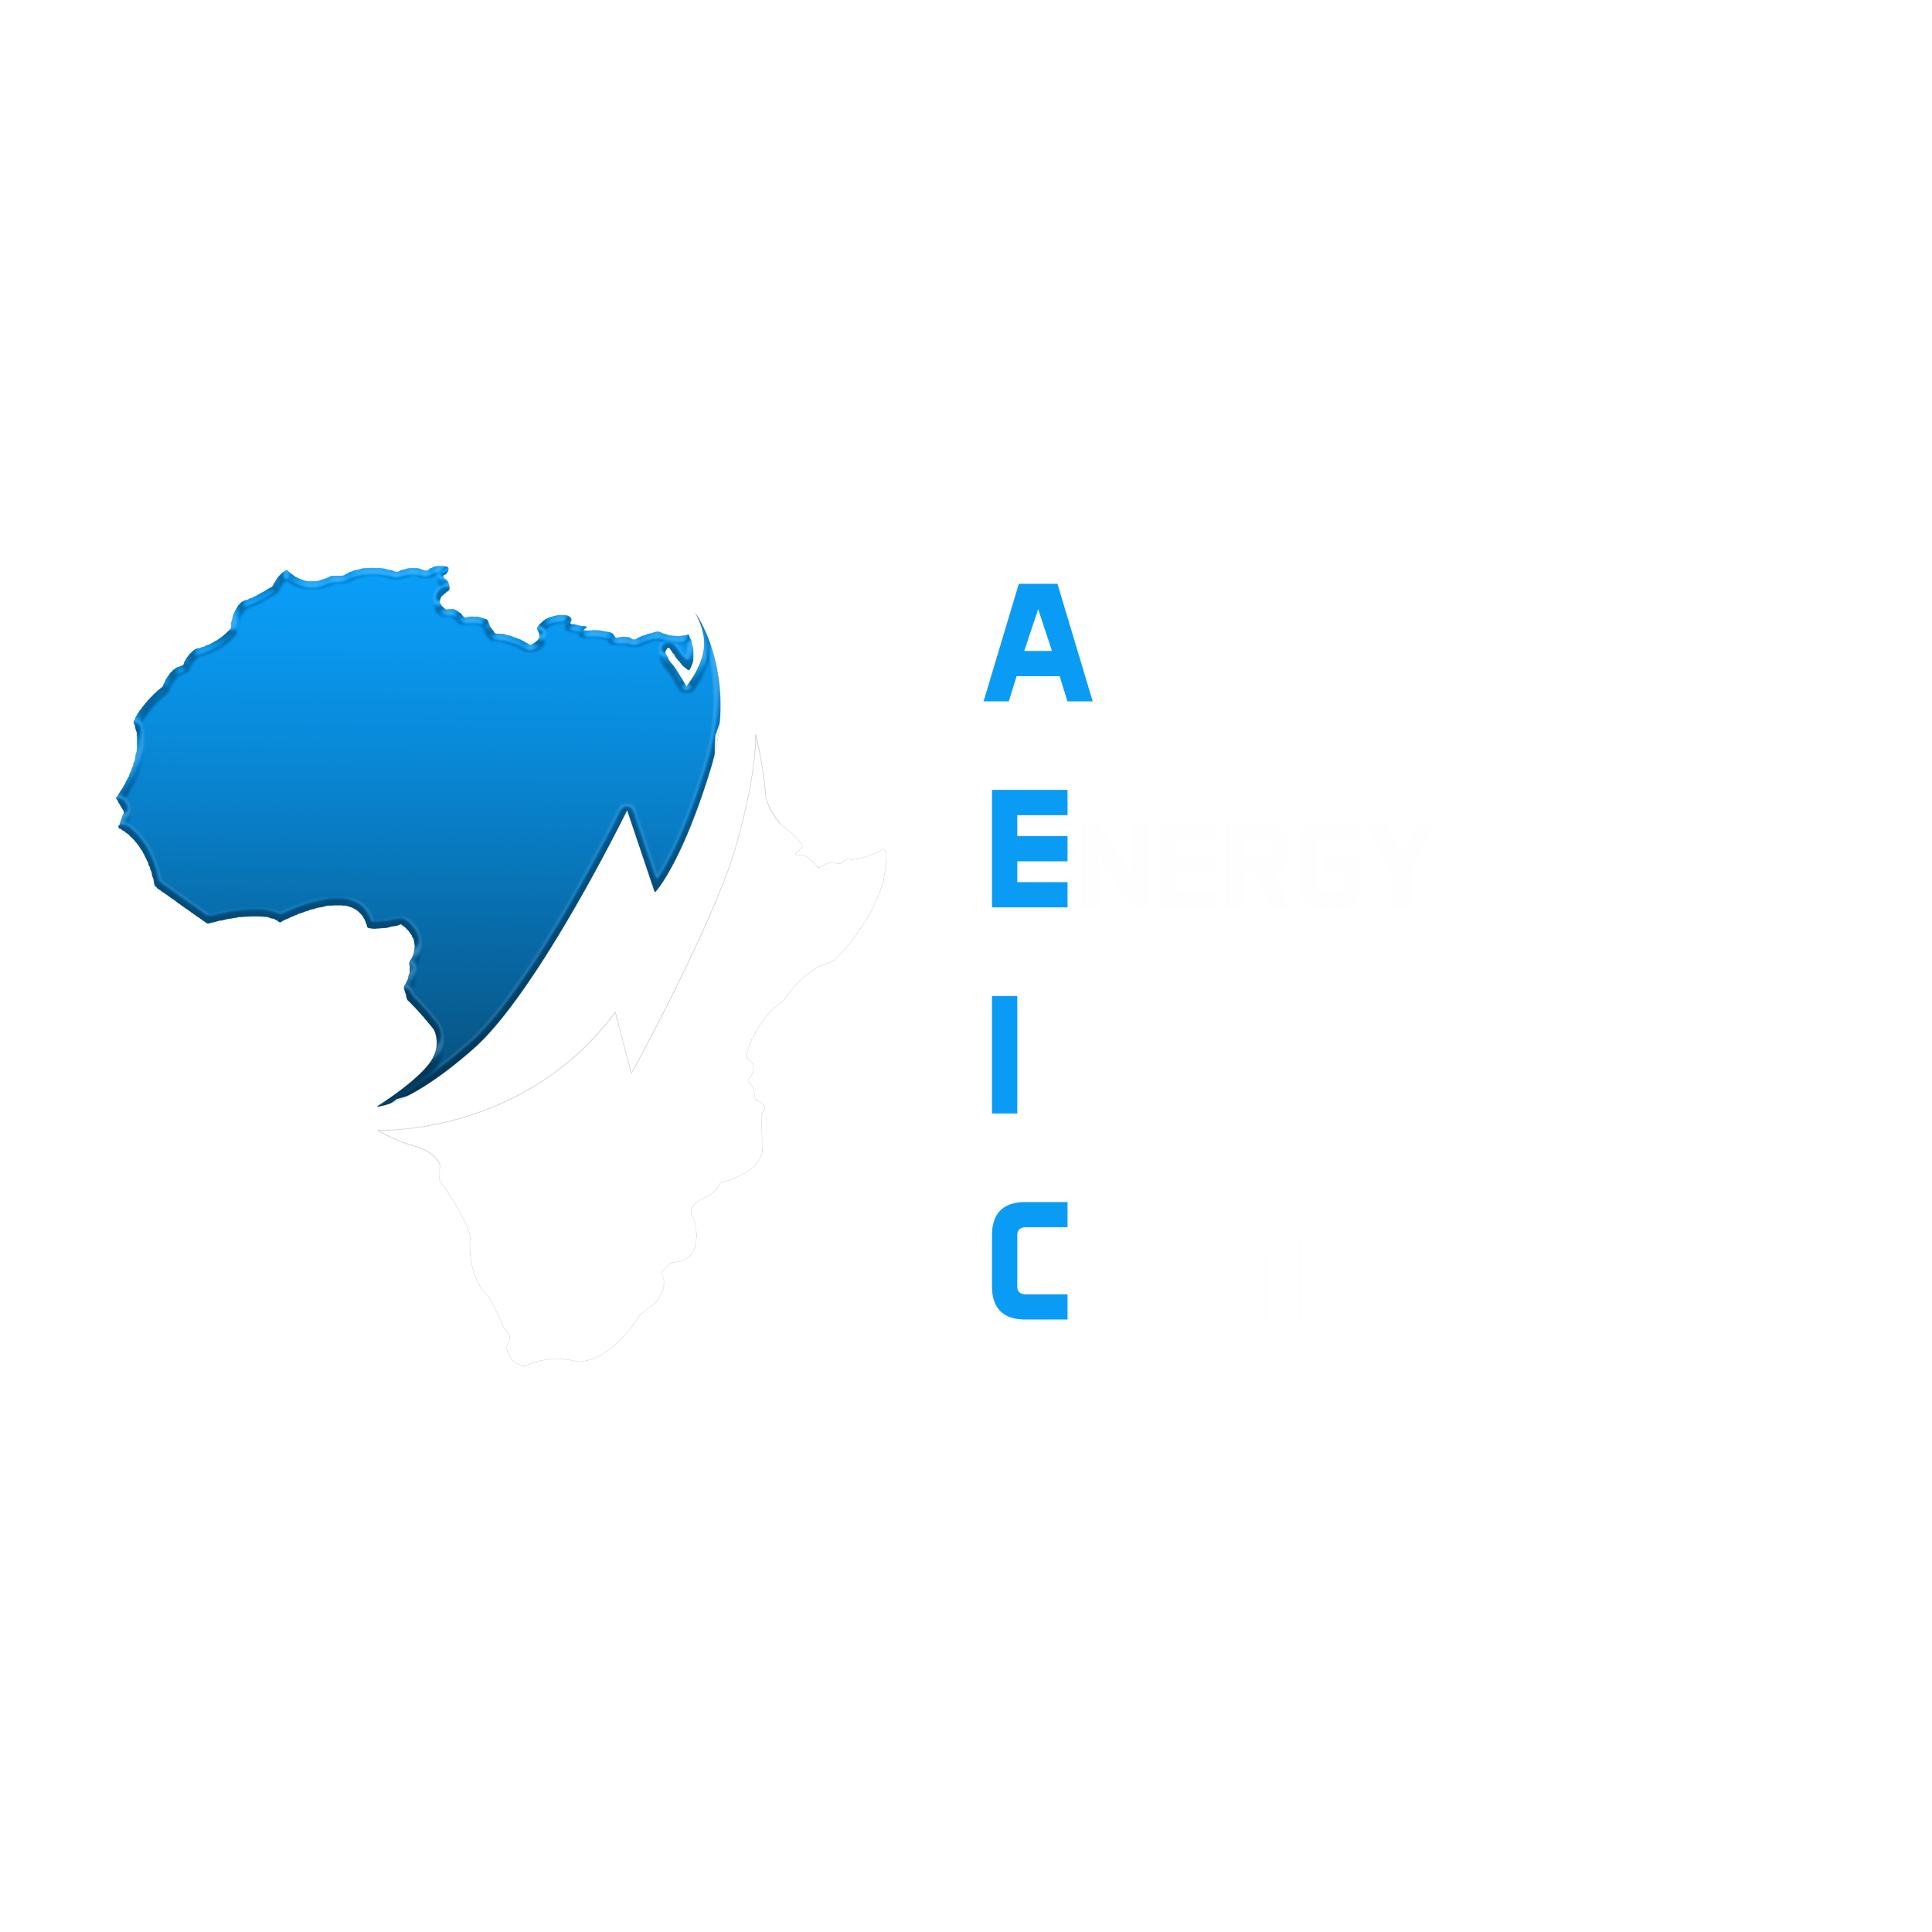 AEIC – AFRICAN ENERGY INFORMATION CENTRE